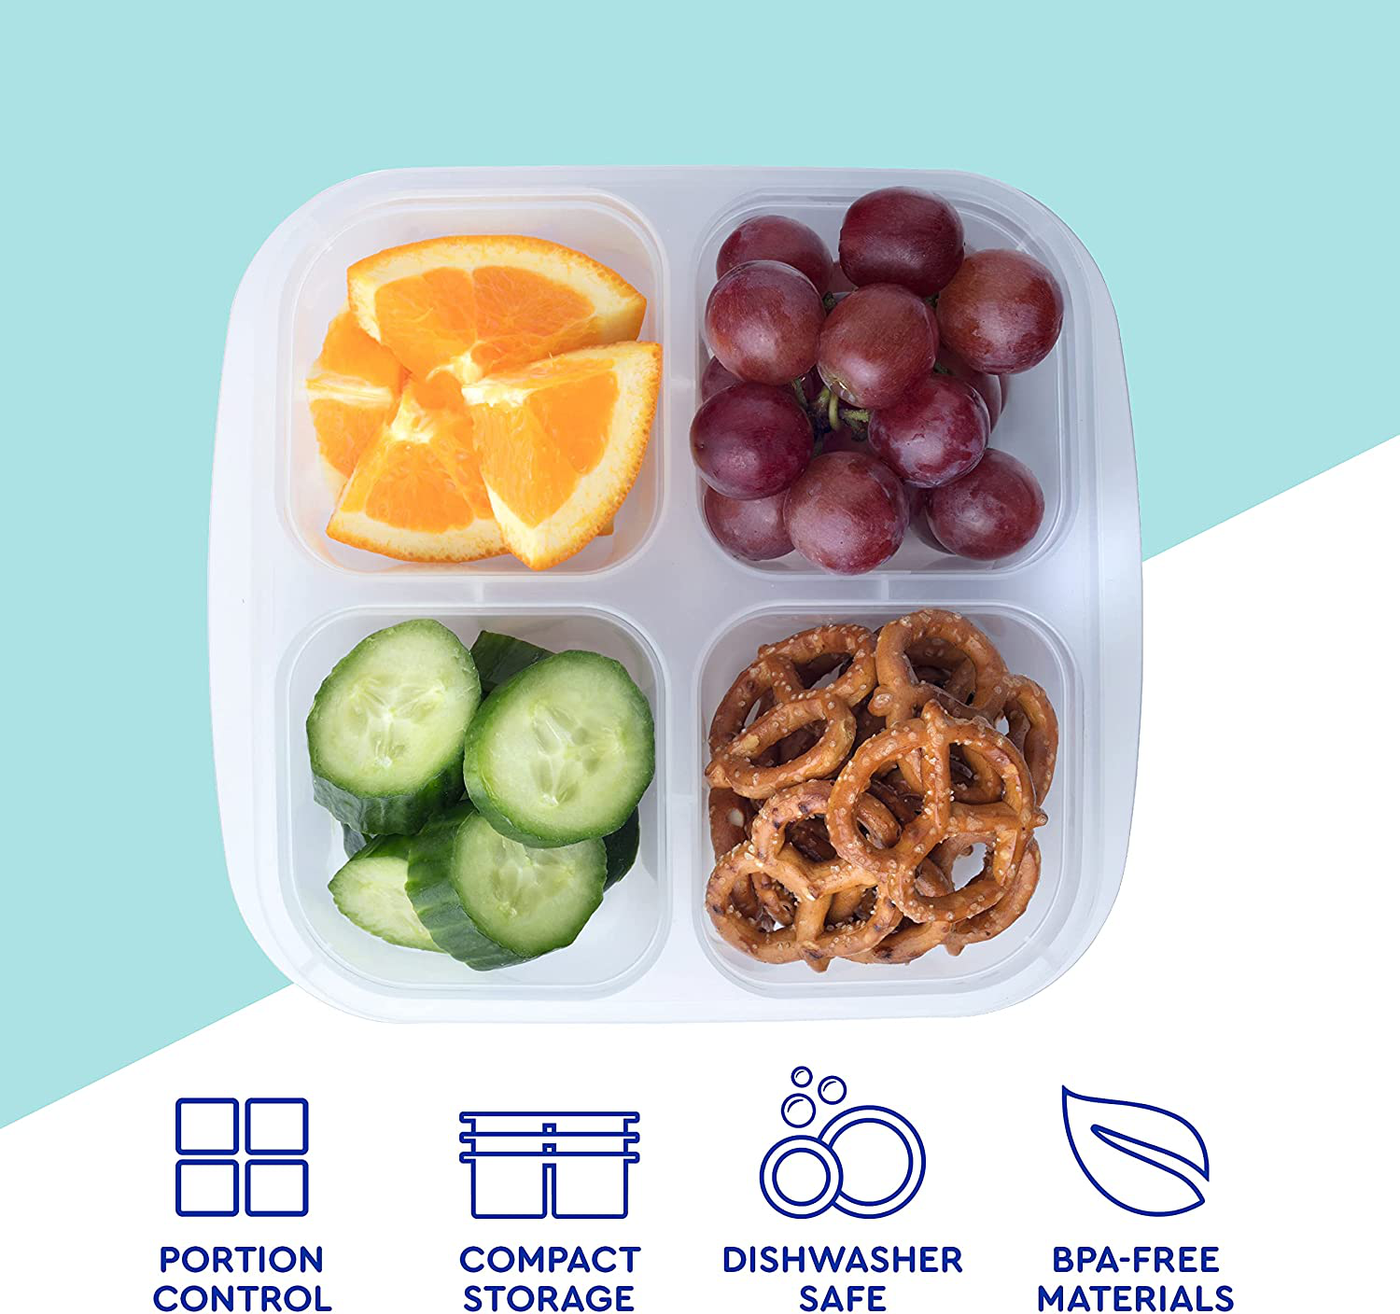 EasyLunchboxes - Bento Snack Boxes - Reusable 4-Compartment Food Containers for School, Work and Travel, Set of 4, Classic